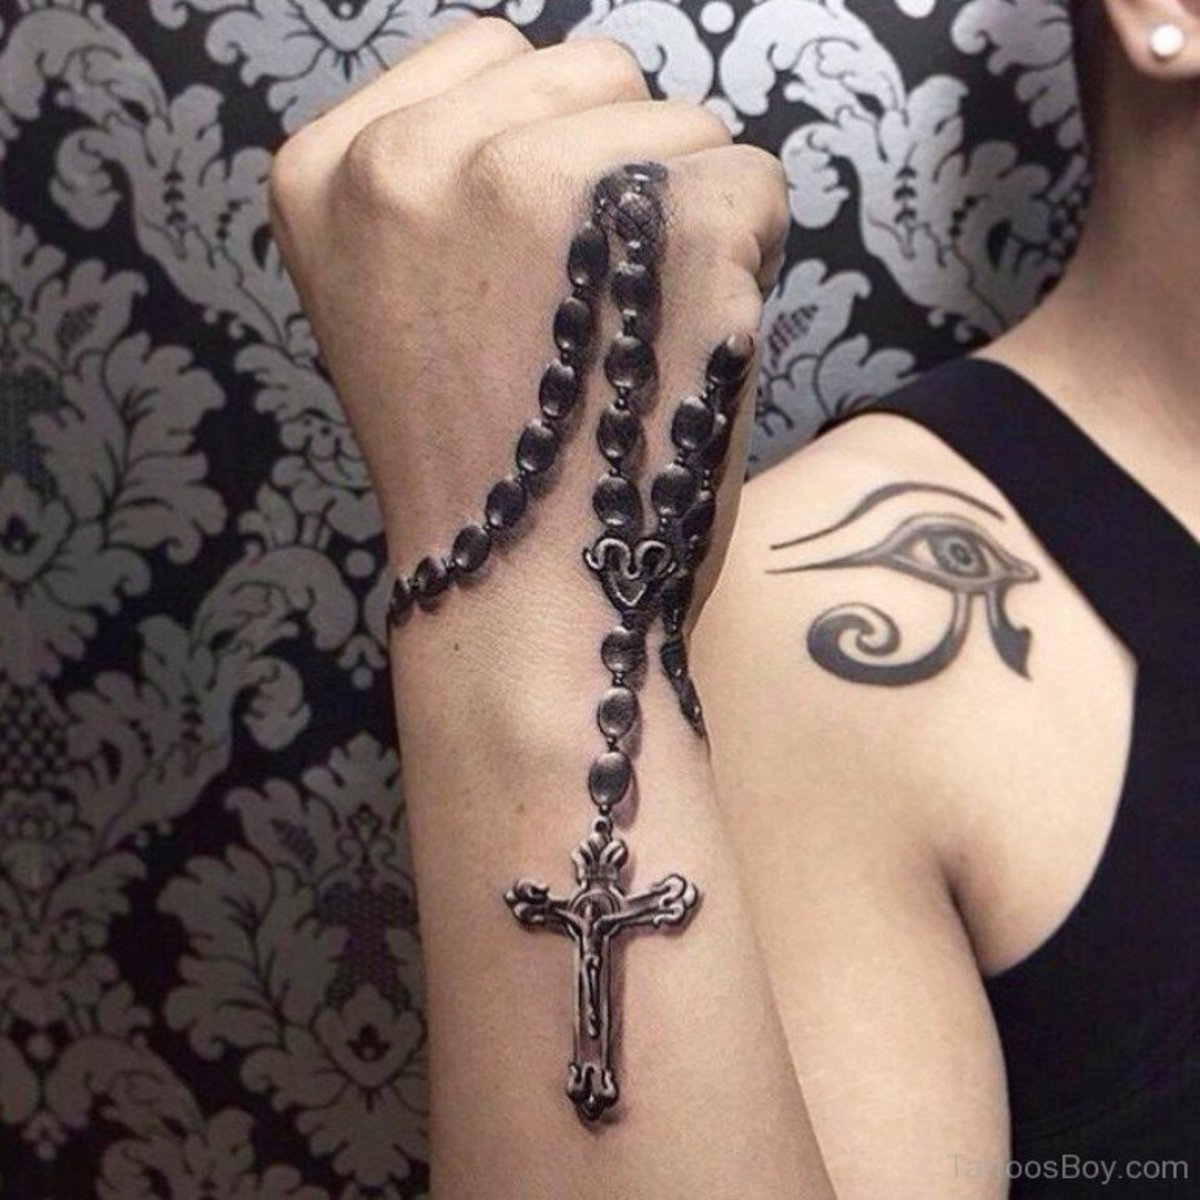 Rosary Bead Tattoo Ideas, Designs, and Meanings | TatRing